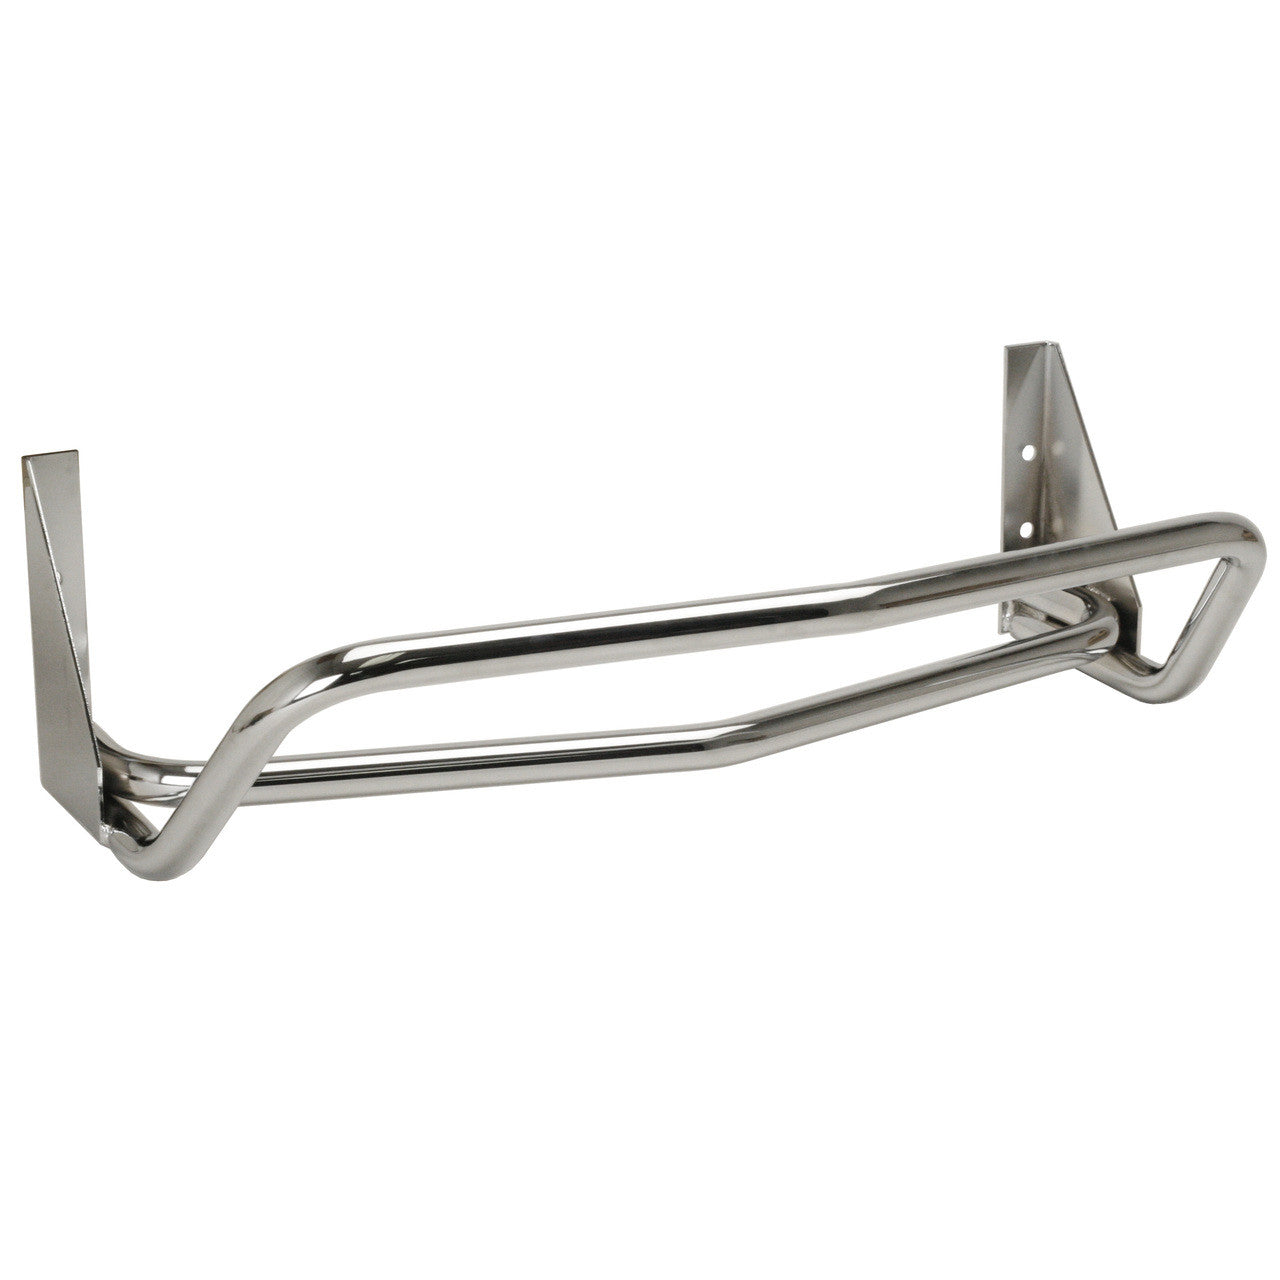 Latest Rage Manx Dune Buggy Front Chrome Bumper With Ball Joint Front End